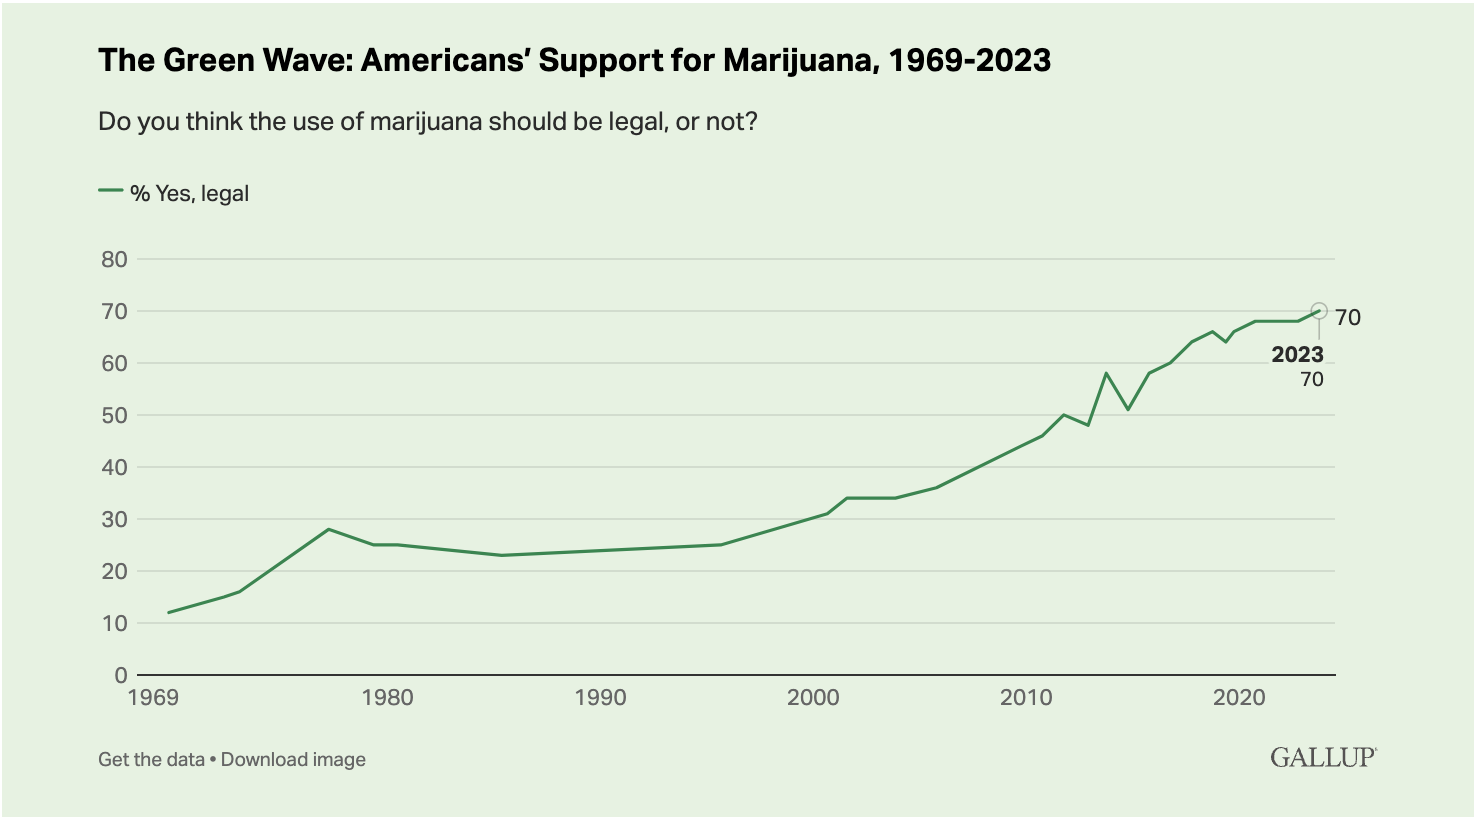 Graph from Gallup Titled: "The Green Wave: Americans' Support for Marijuana: 1969-2023" Showing a rise in support to 70% in 2023.